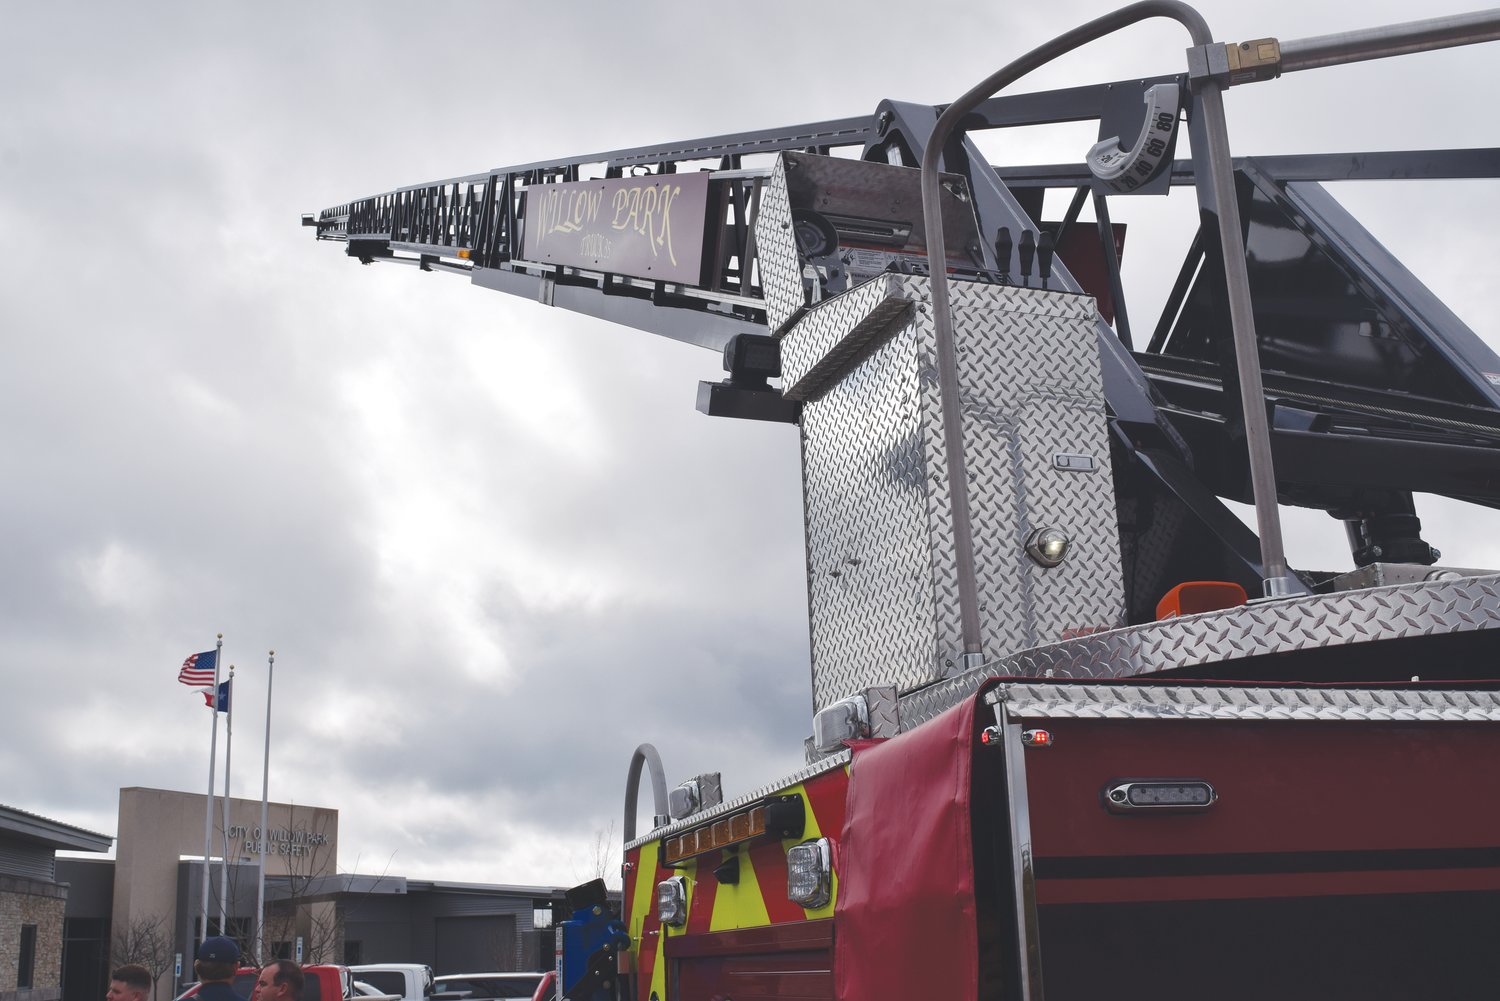 The Willow Park Fire Department obtained a new 75,000-pound ladder truck and a new Public Safety Building to park it in late in 2019.